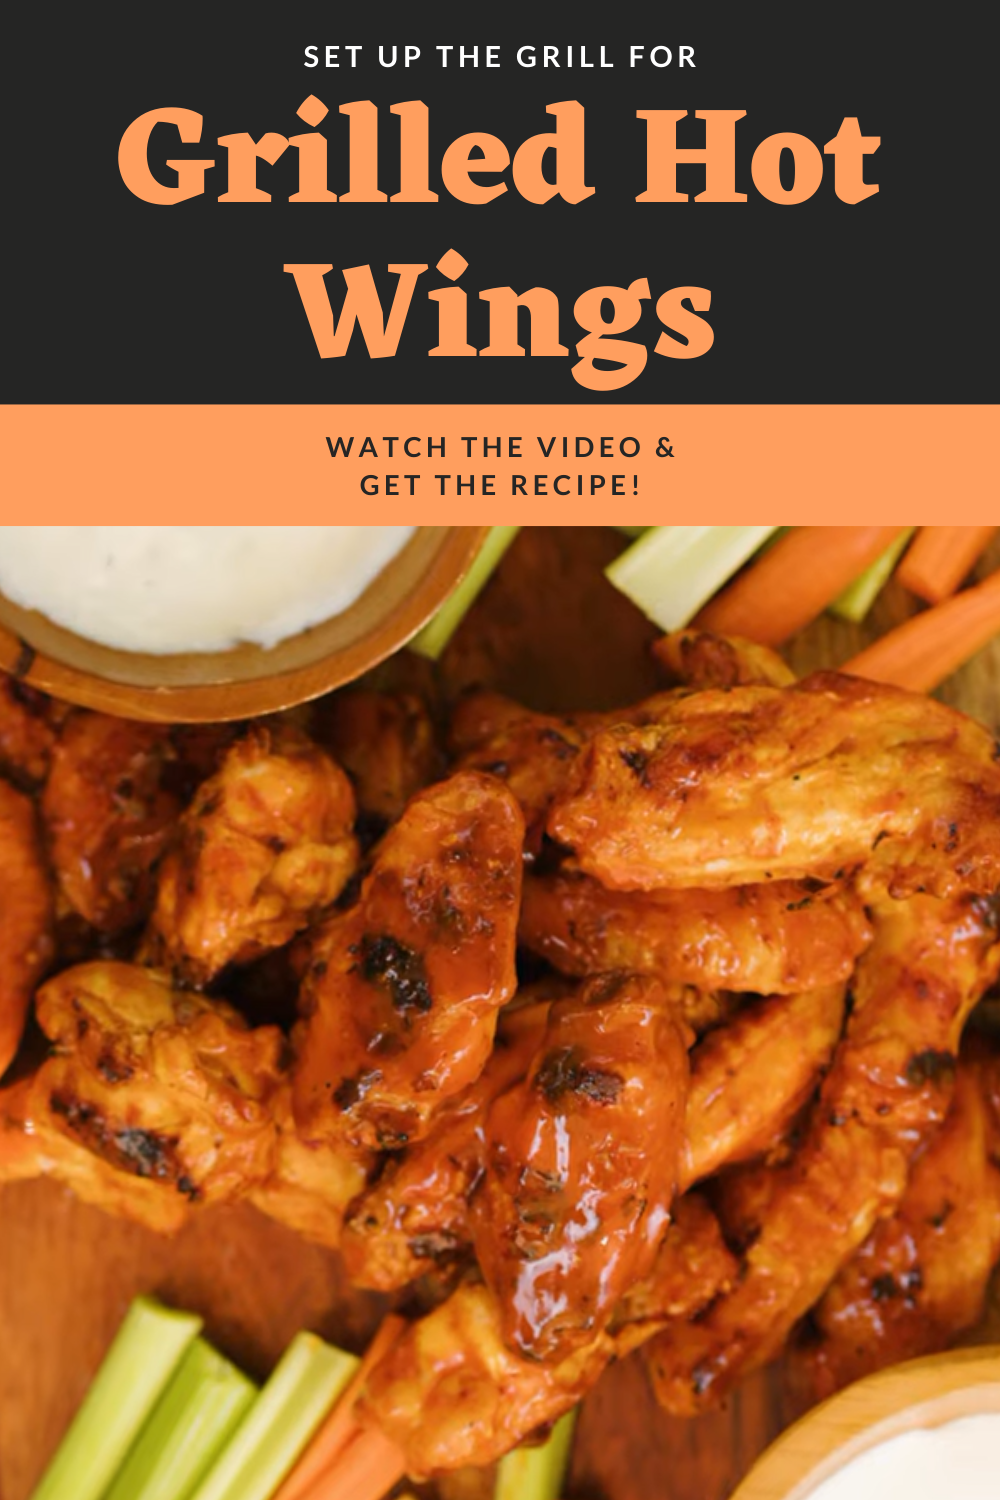 Fire up the grill and turn up the spice! These delicious grilled buffalo wings are great for game day or your next campground adventure.